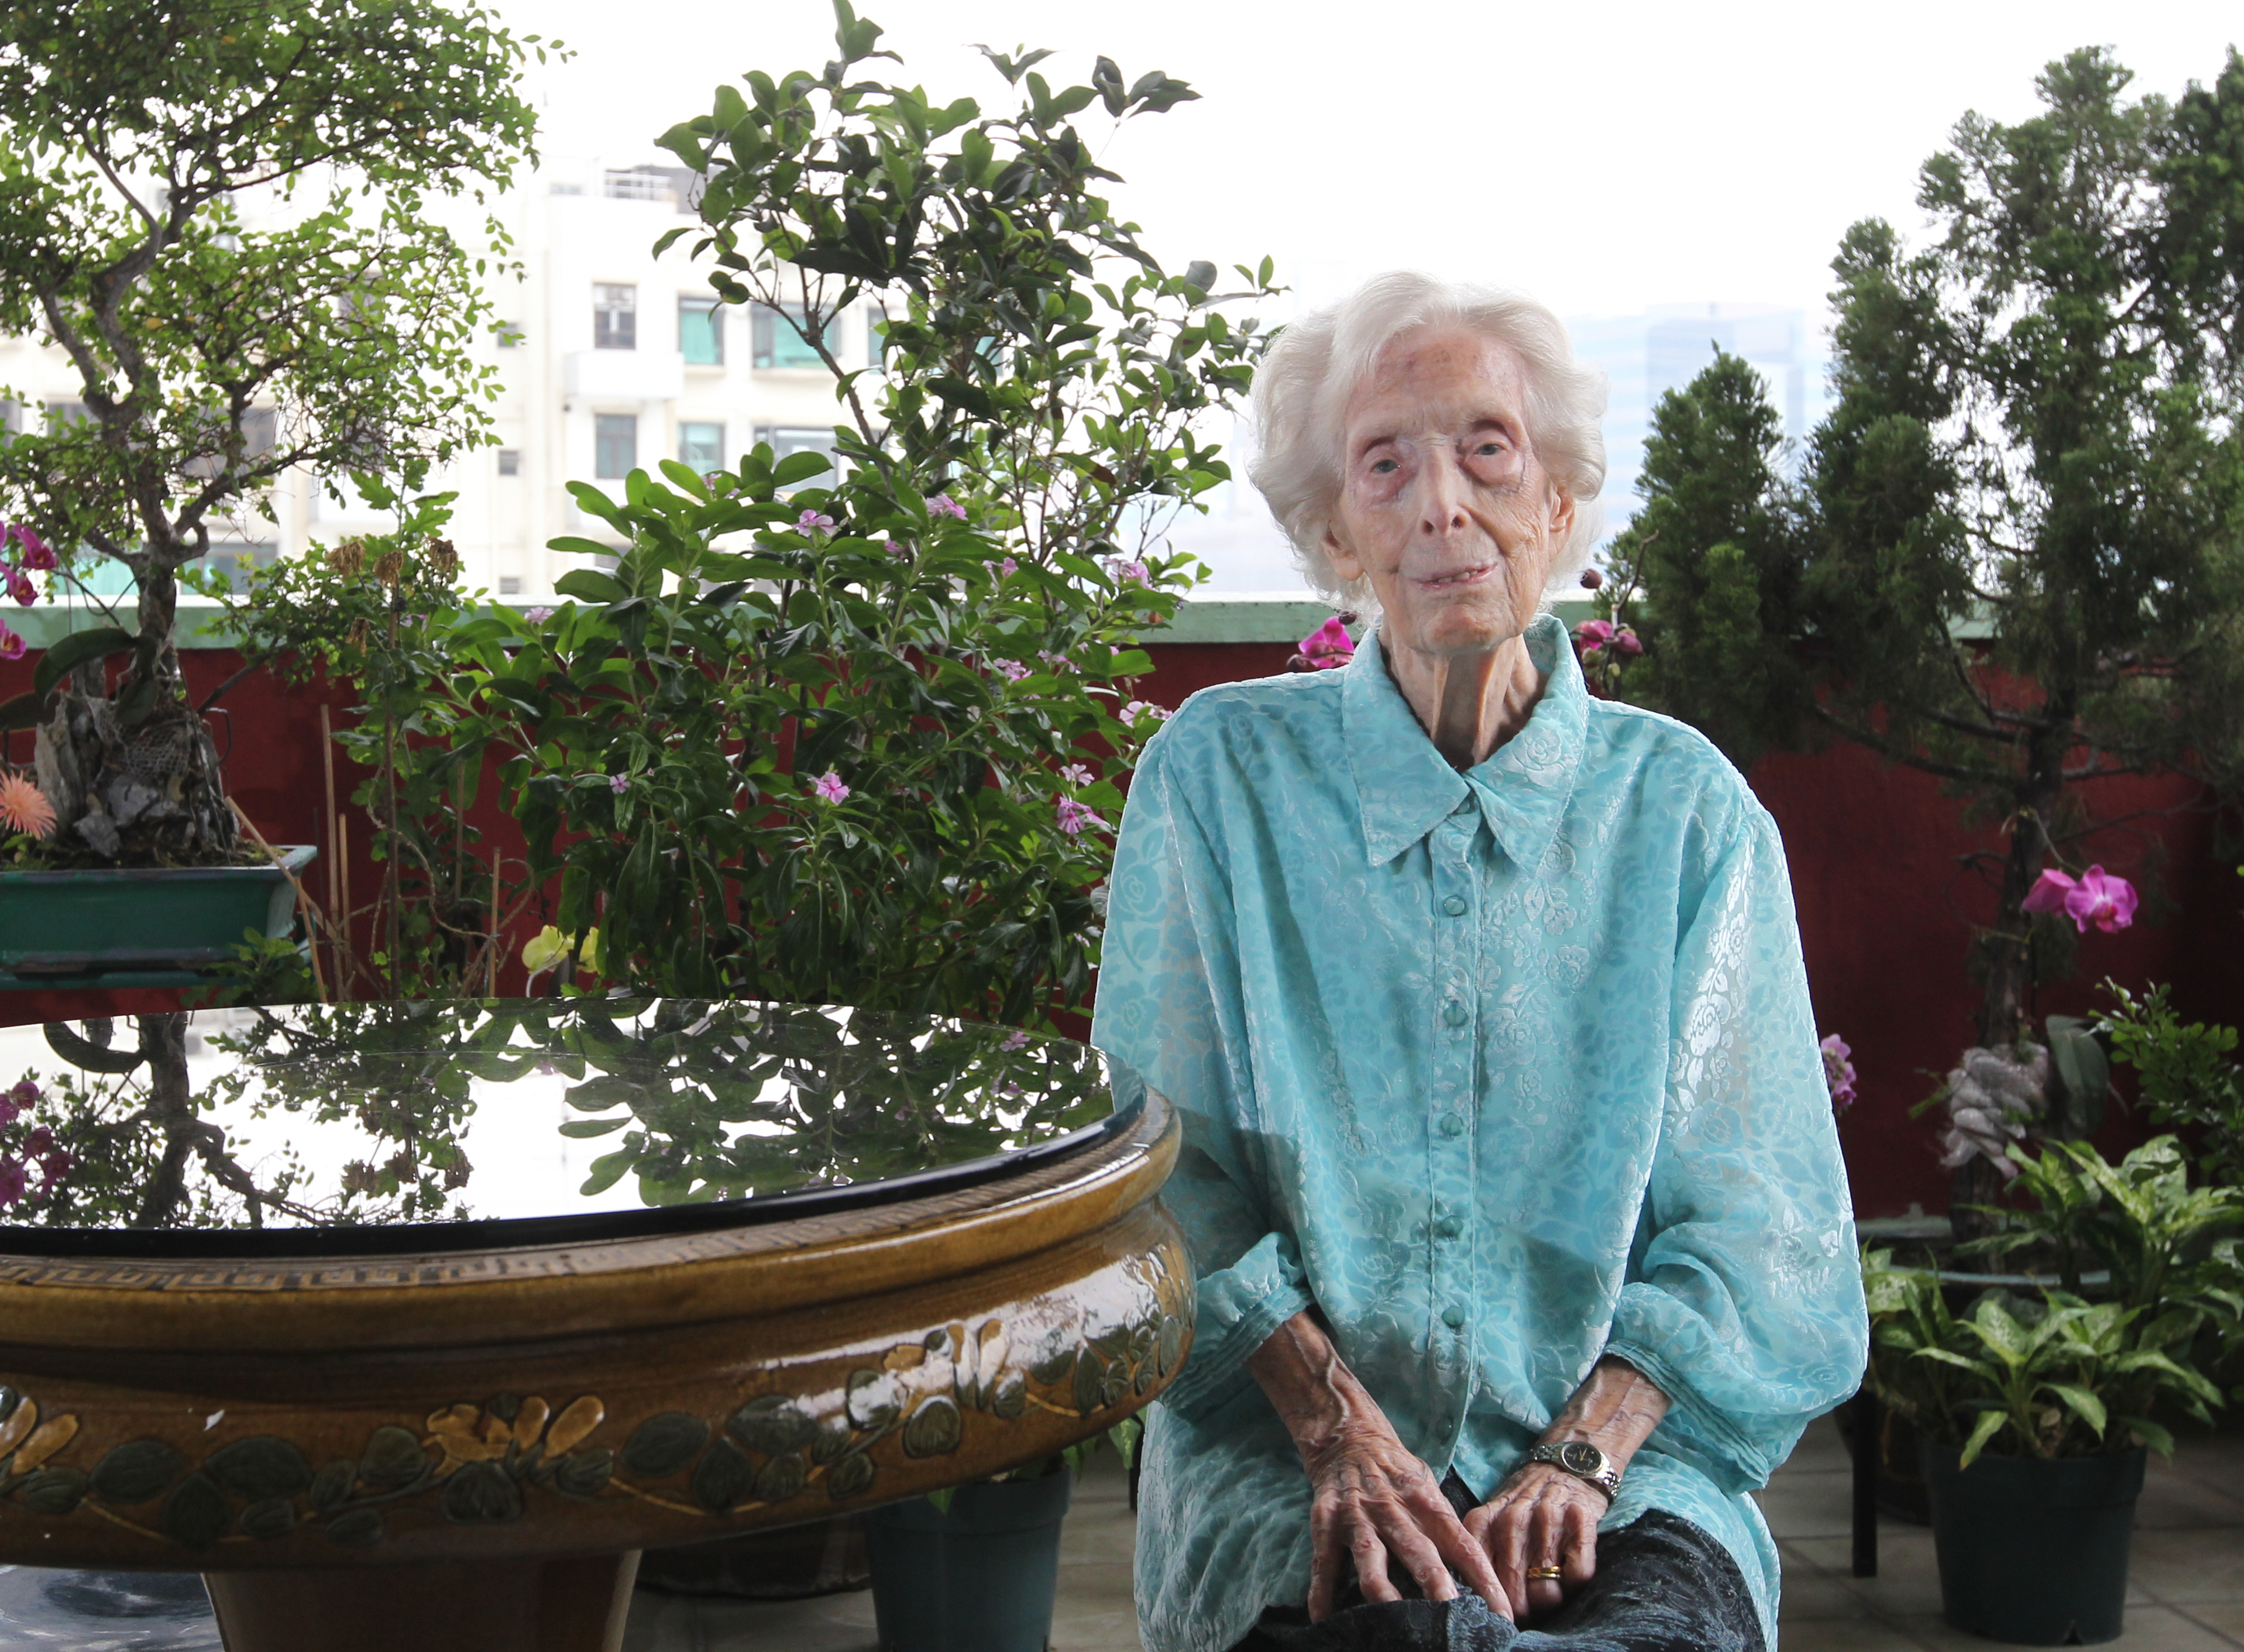 Elsie Tu, former lawmaker and social activist, is interviewed at her home in Kwun Tong. She will celebrate her 100th birthday on May 31. 16APR13